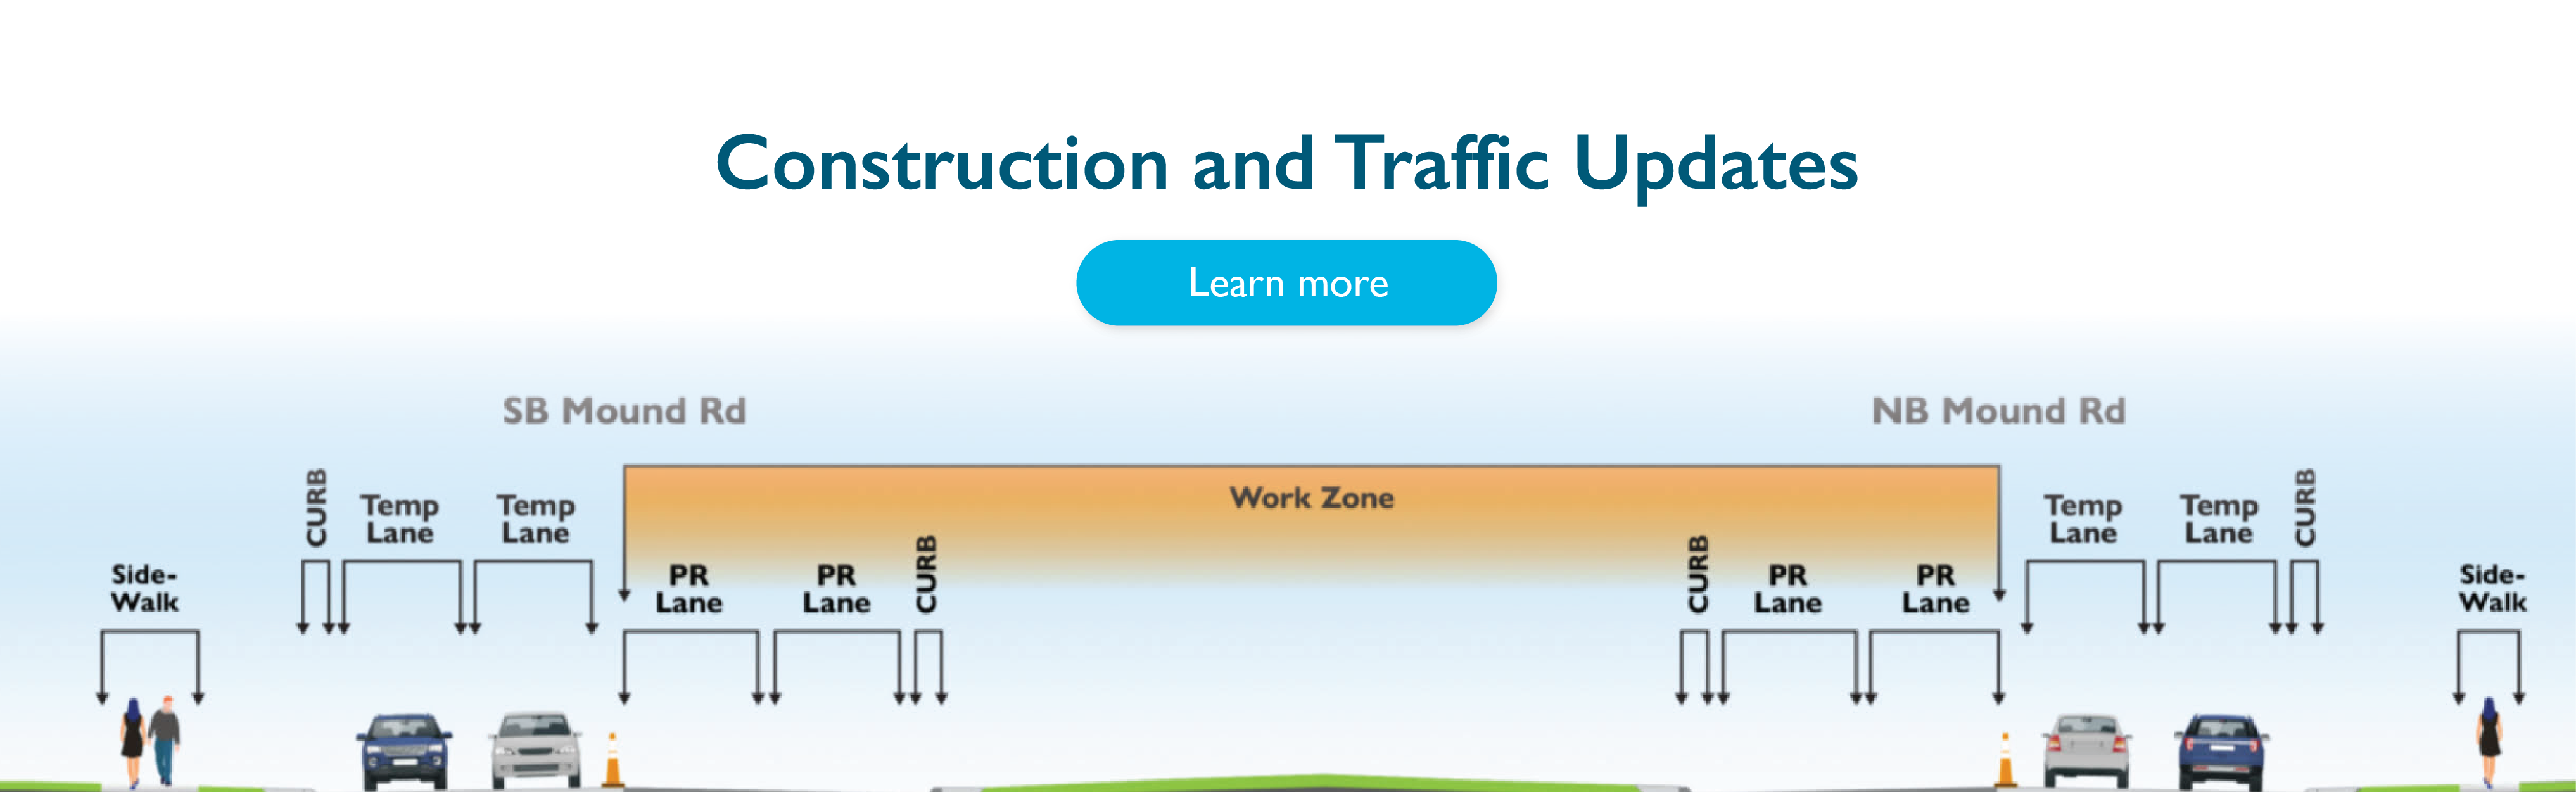 Construction and Traffic Updates